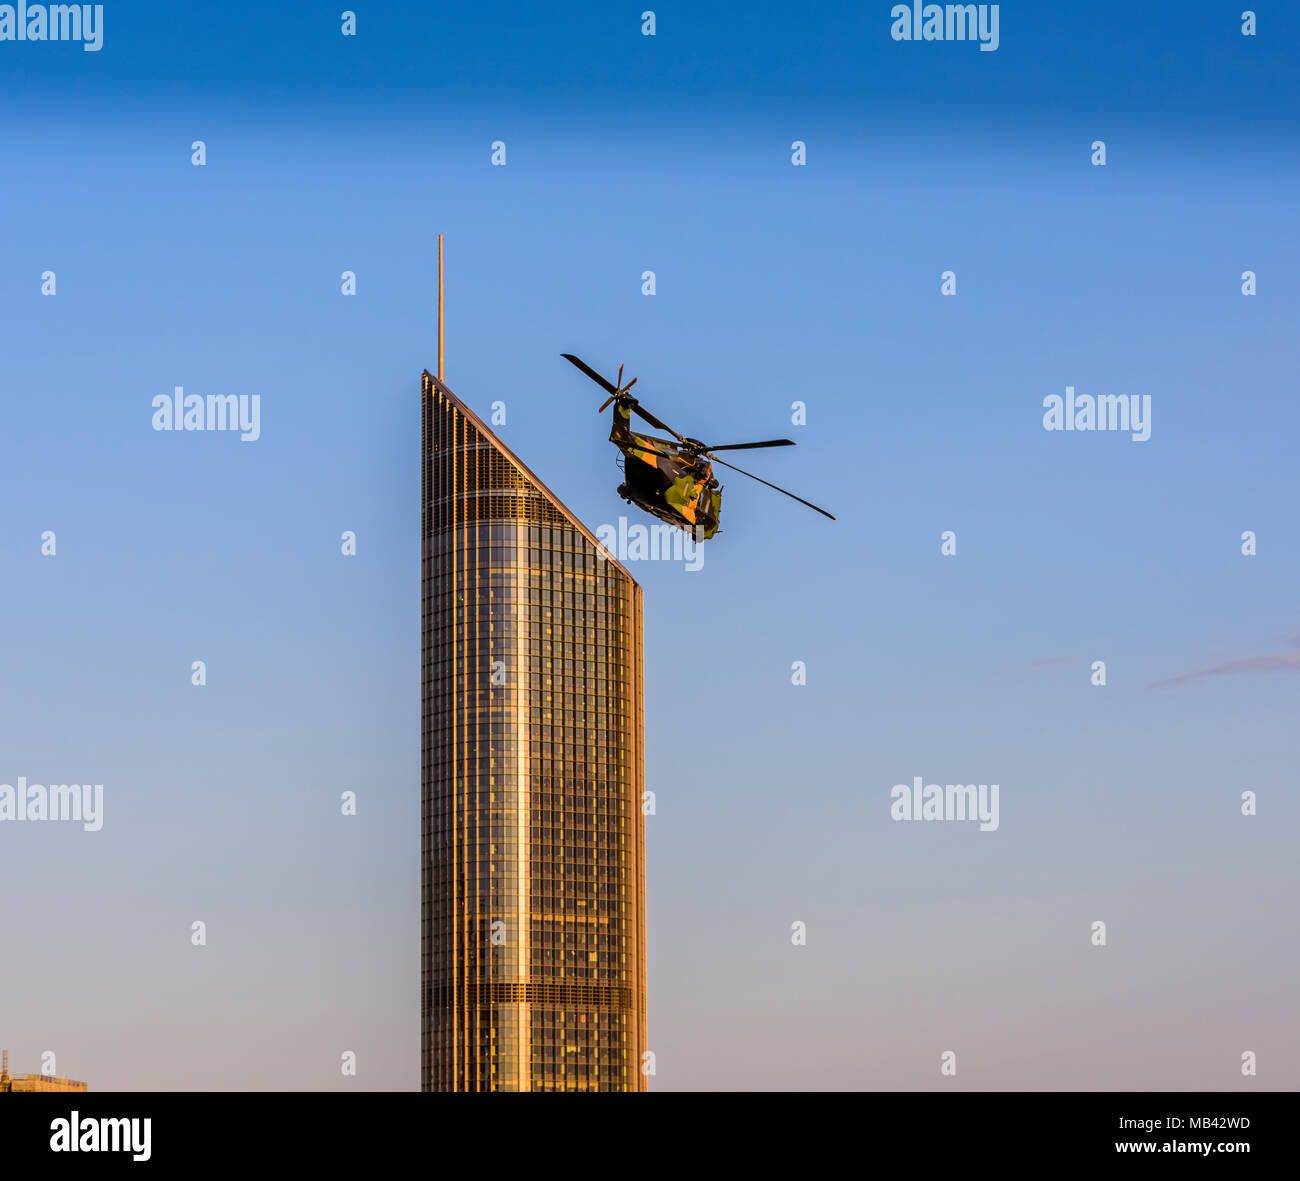 An Australian army helicopter flies over the 1 William Street building during the 2017 Riverfire in Brisbane, Queensland. Stock Photo